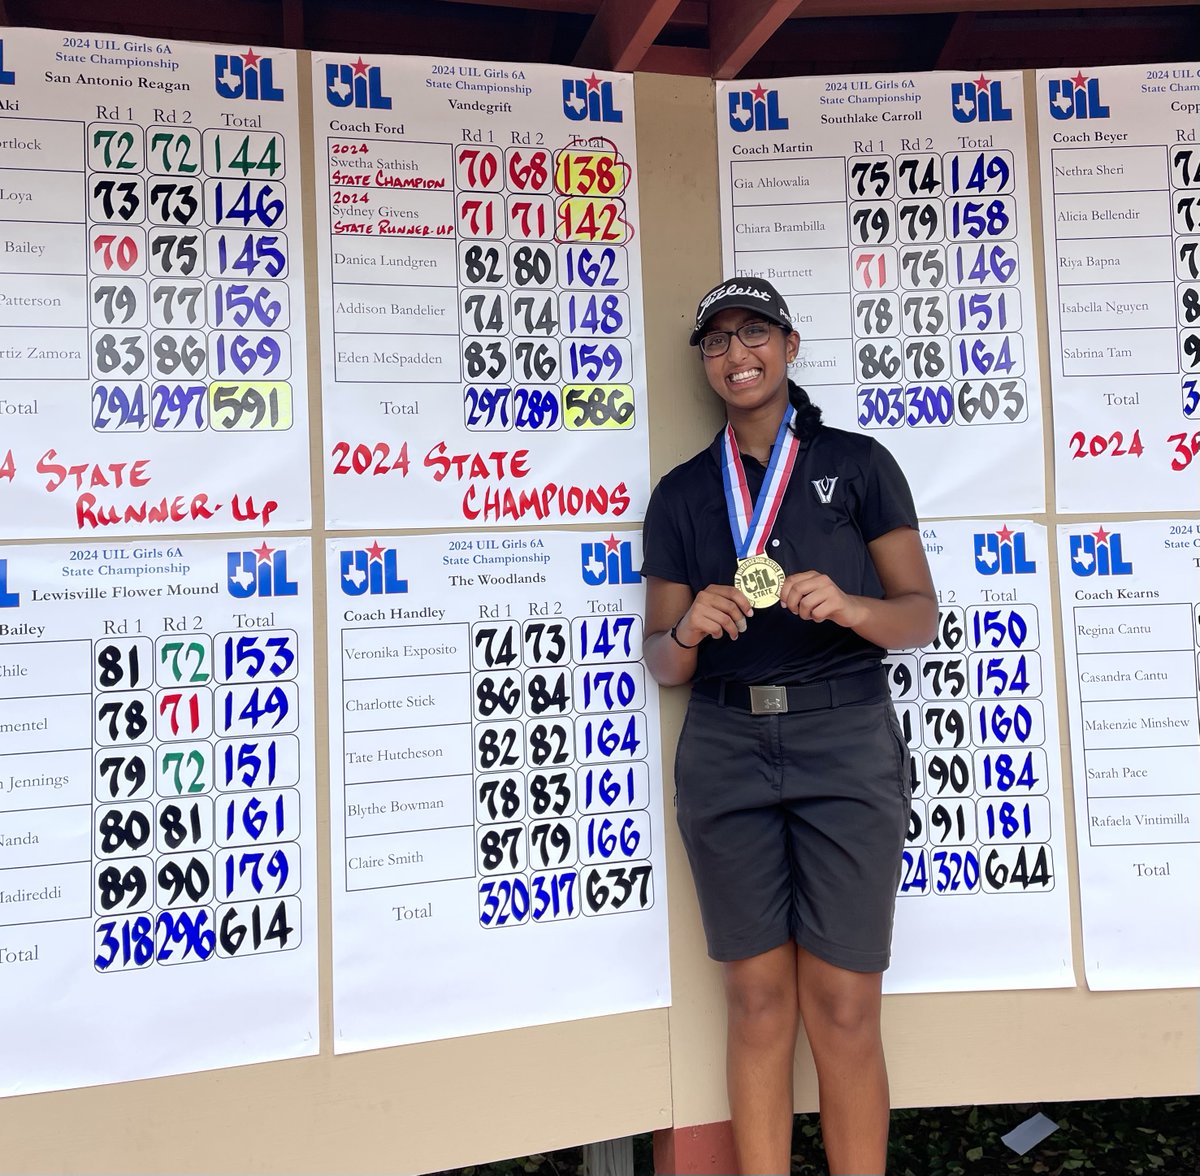 Another victory for the Vipers! 🐍 Austin Vandegrift wins back-to-back Girls 6A #UILState Golf titles with Swetha Sathish claiming the individual championship. RESULTS ➡️ bit.ly/3OcTUMA